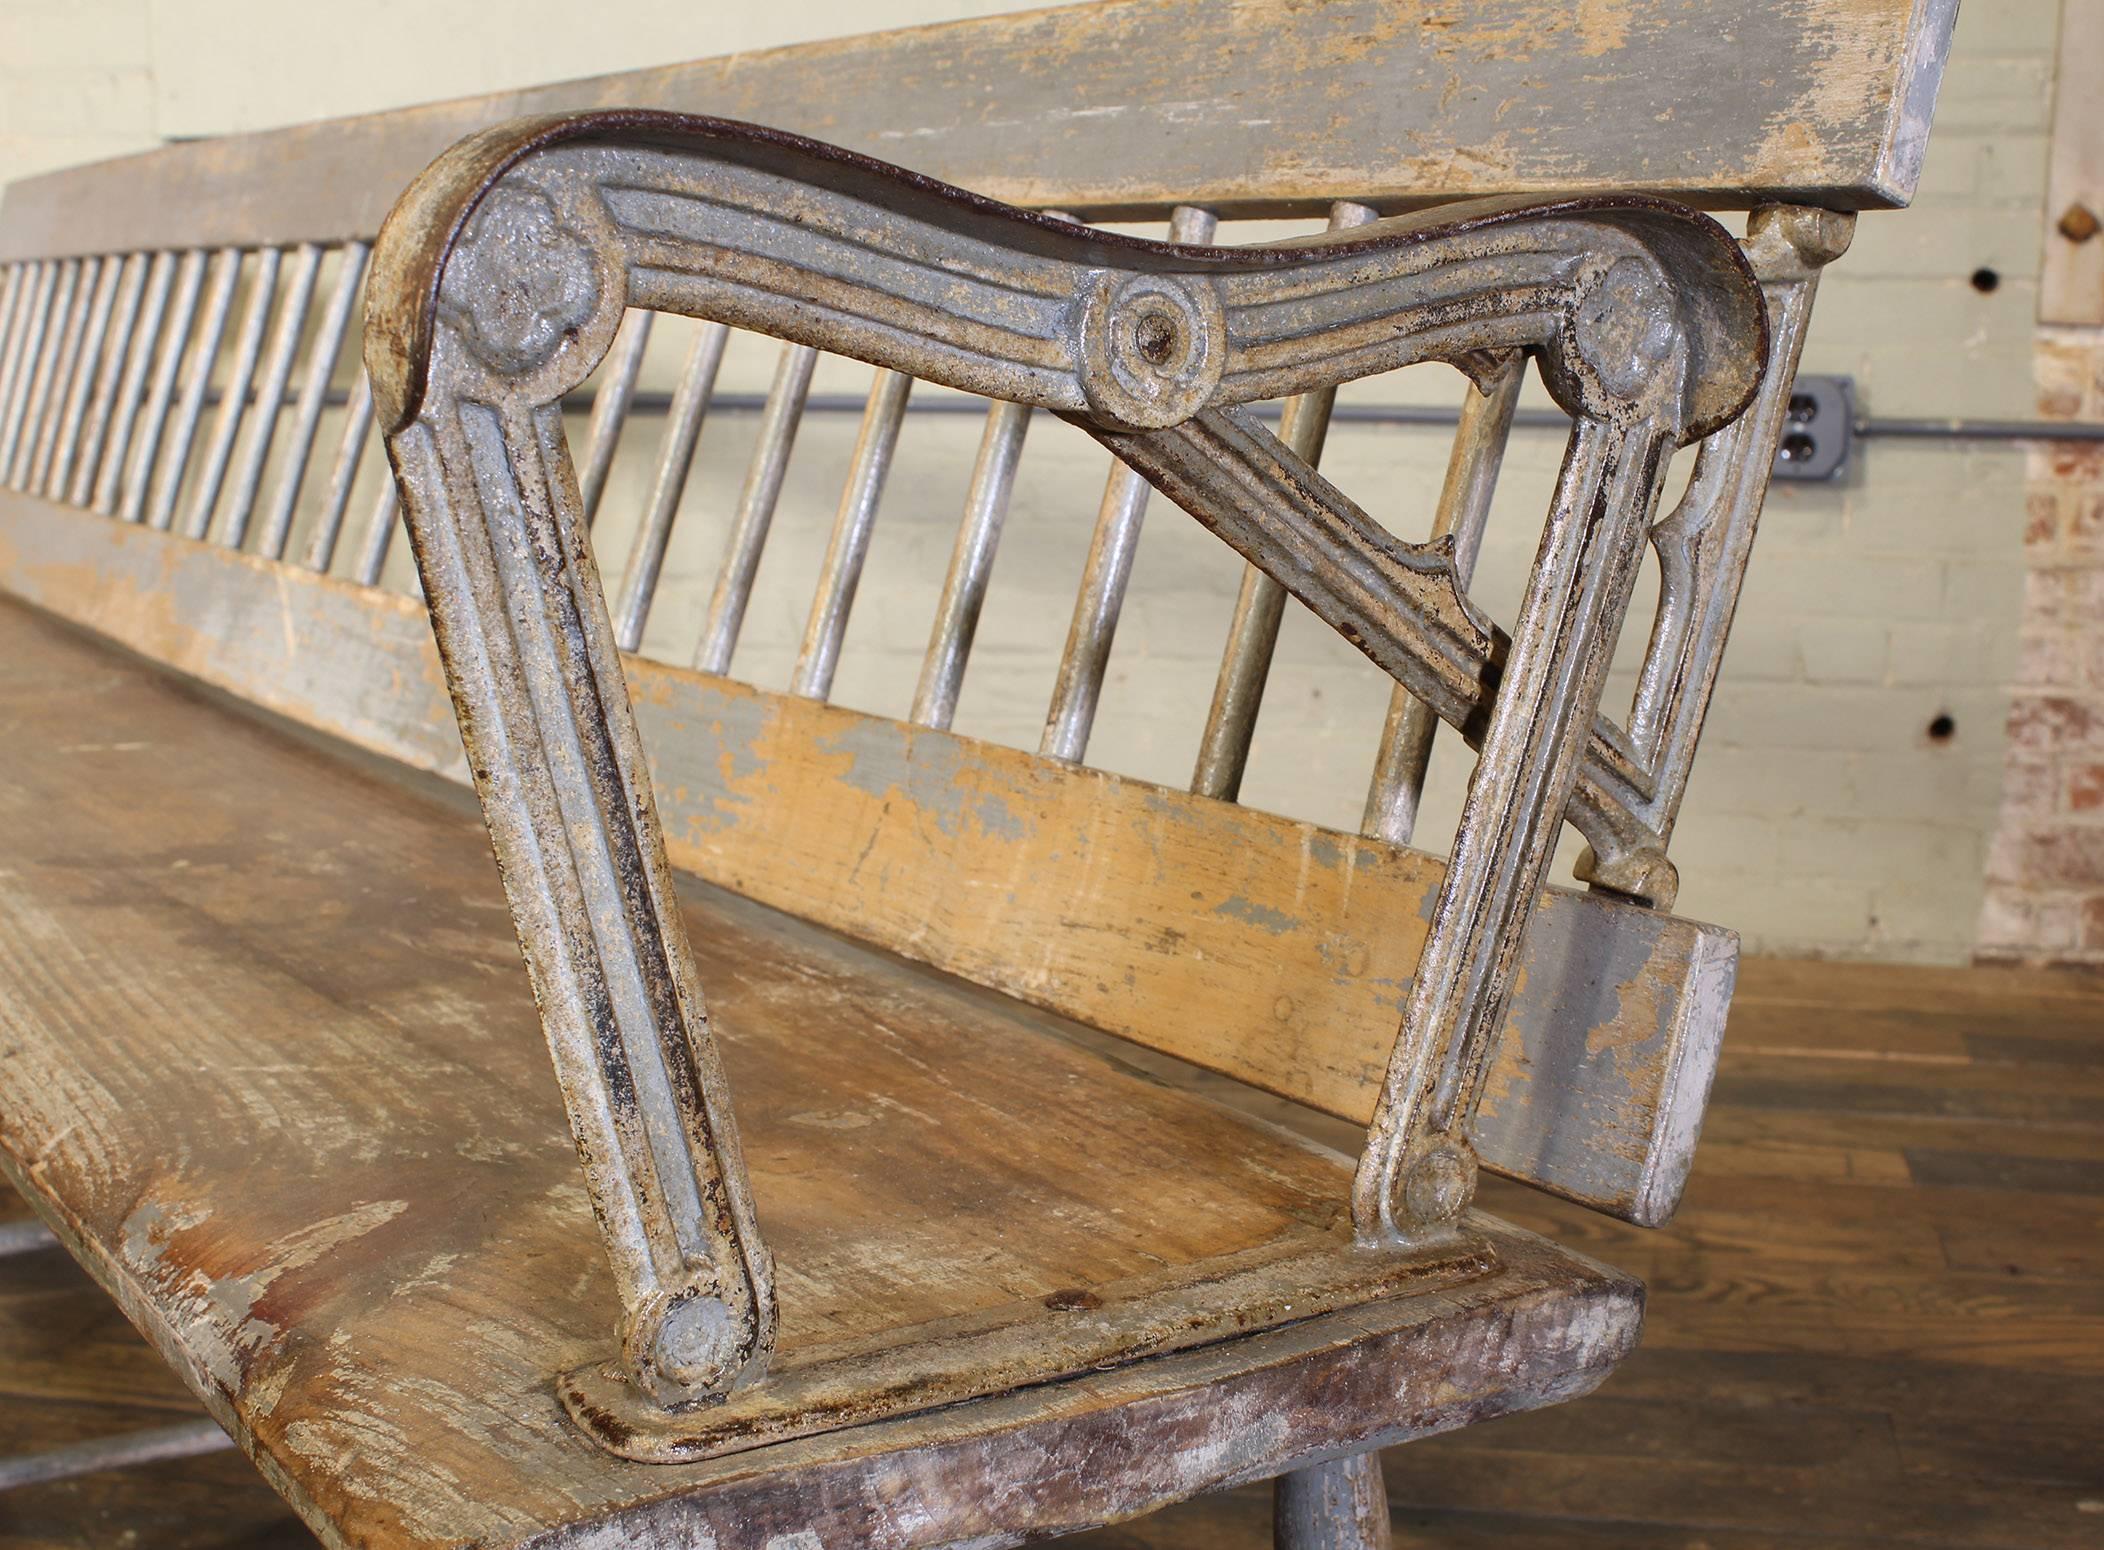 1870s Railroad Station Reversible Flip Back Train Depot Wood and Cast Iron Bench In Distressed Condition In Oakville, CT